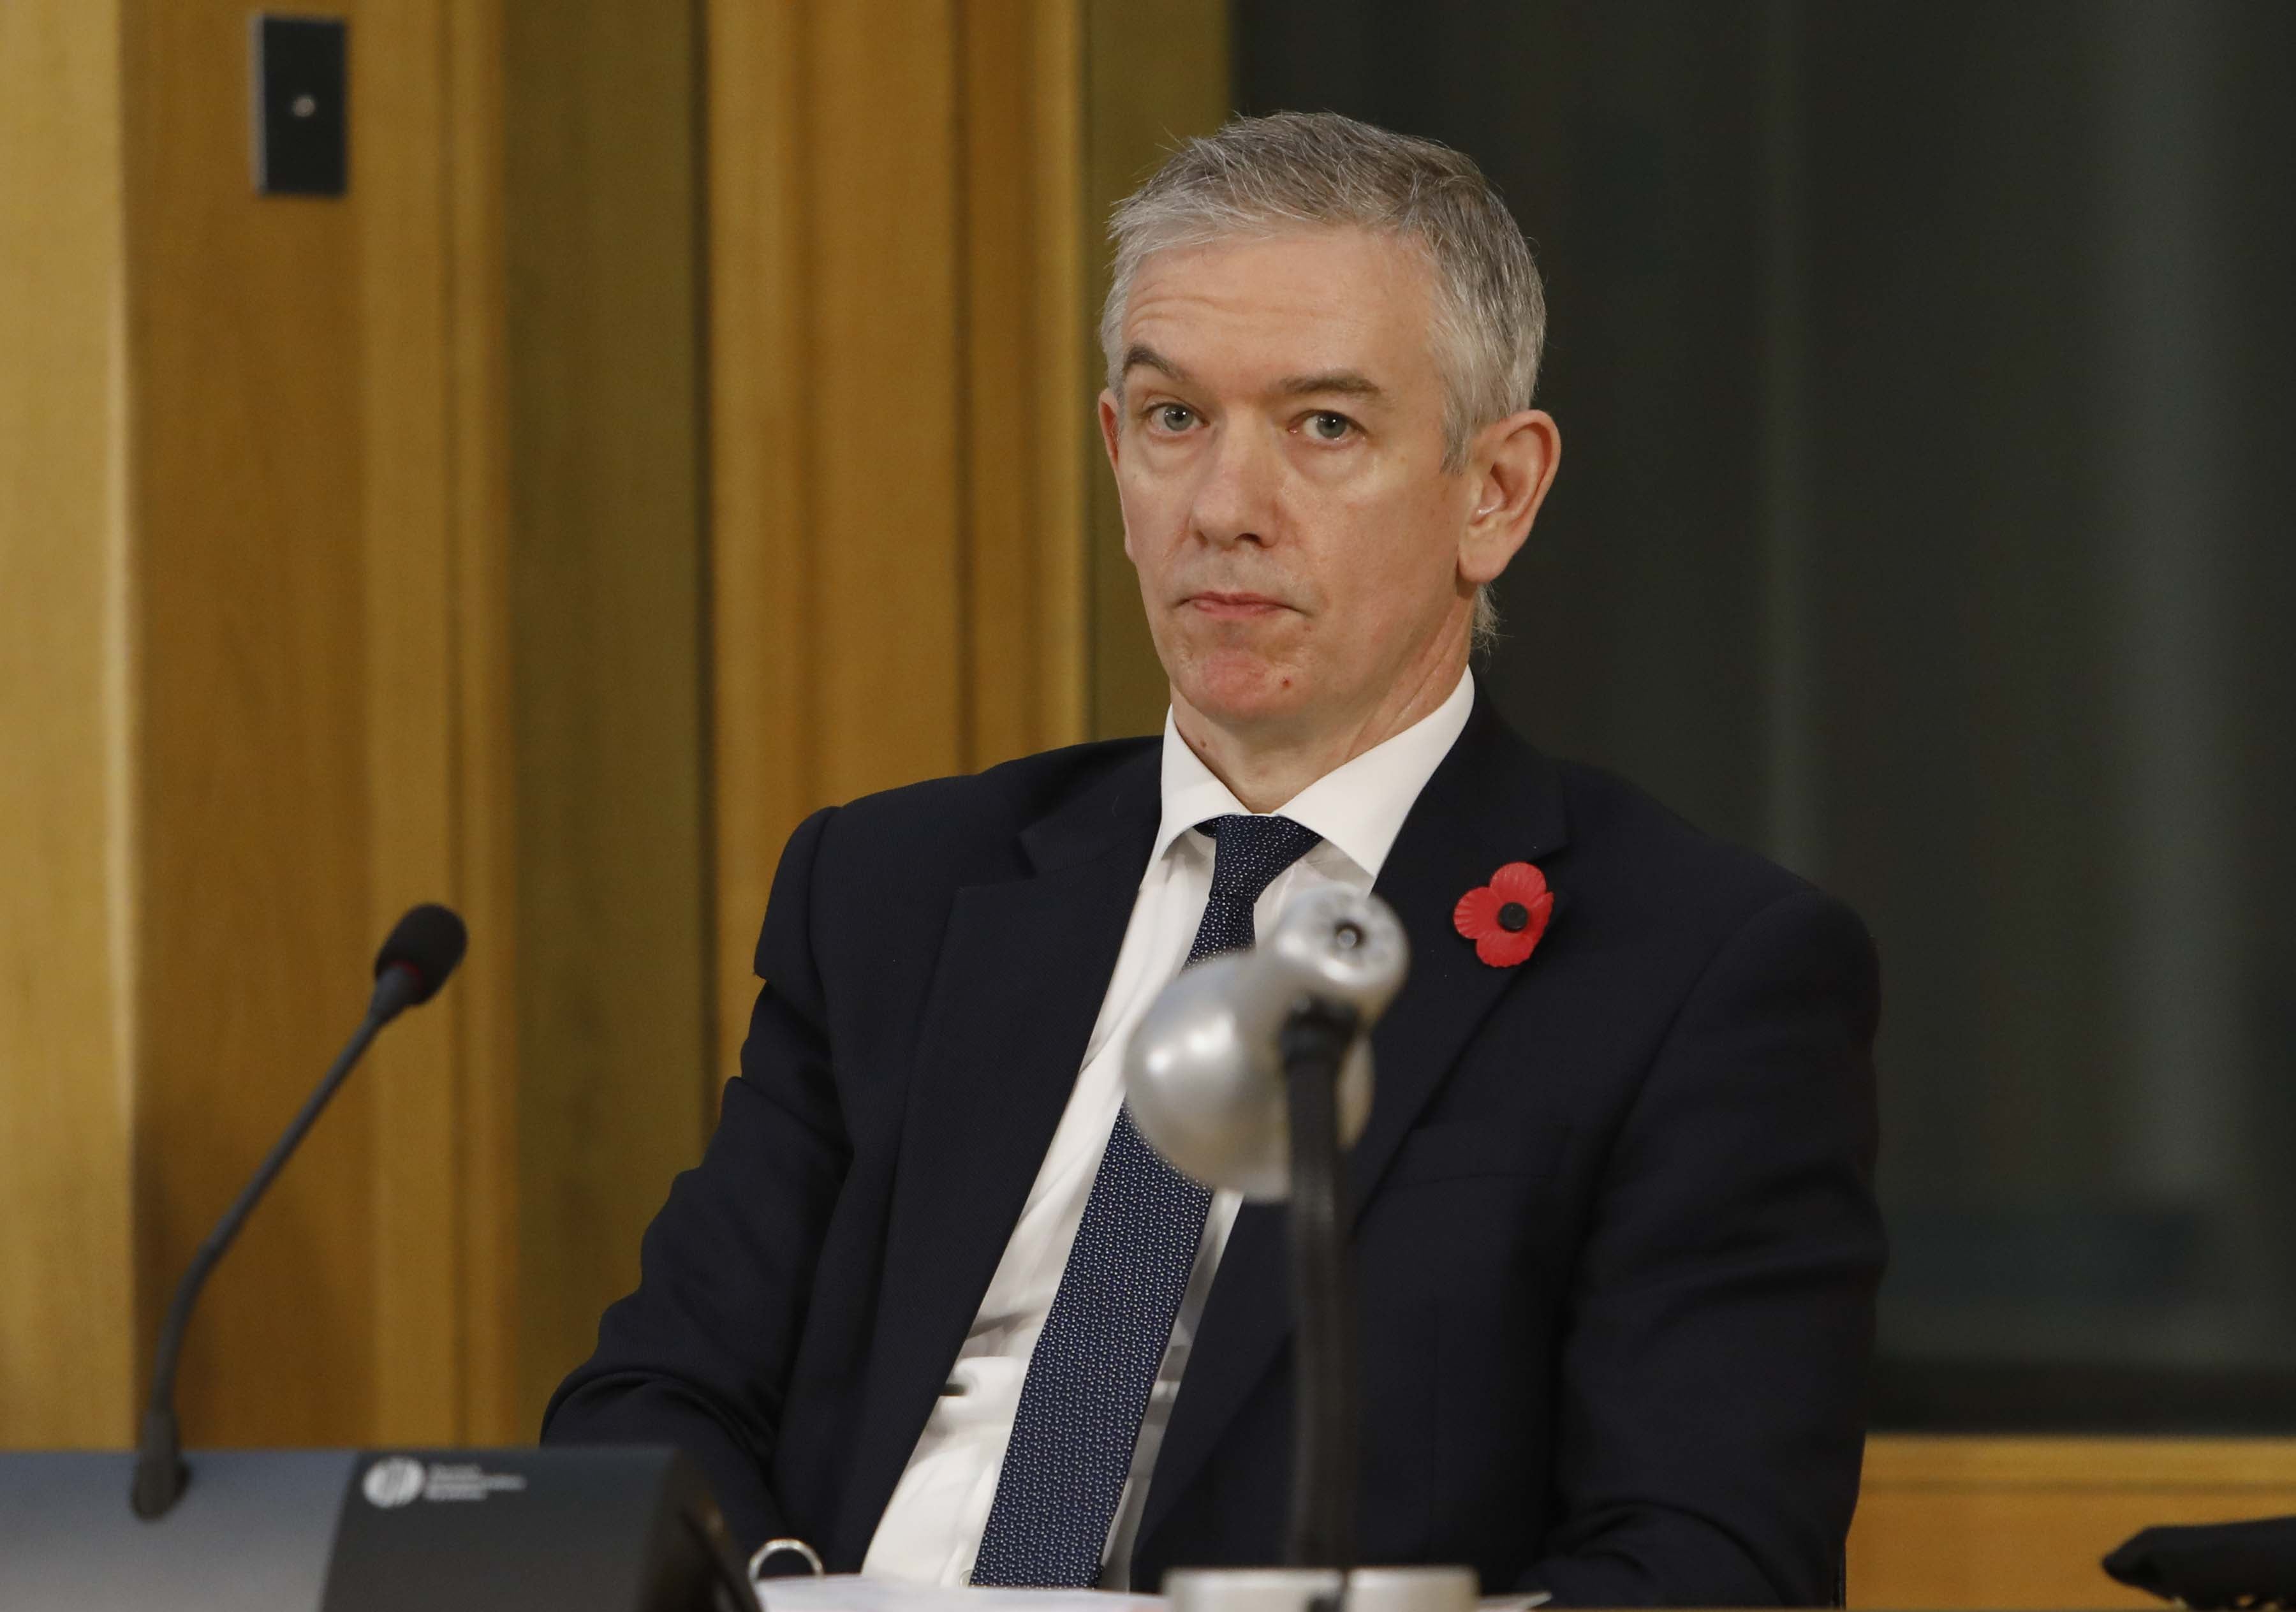 Sir Gregor Smith apologised and deleted the retweet (Andrew Cowan/Scottish Parliament/PA)